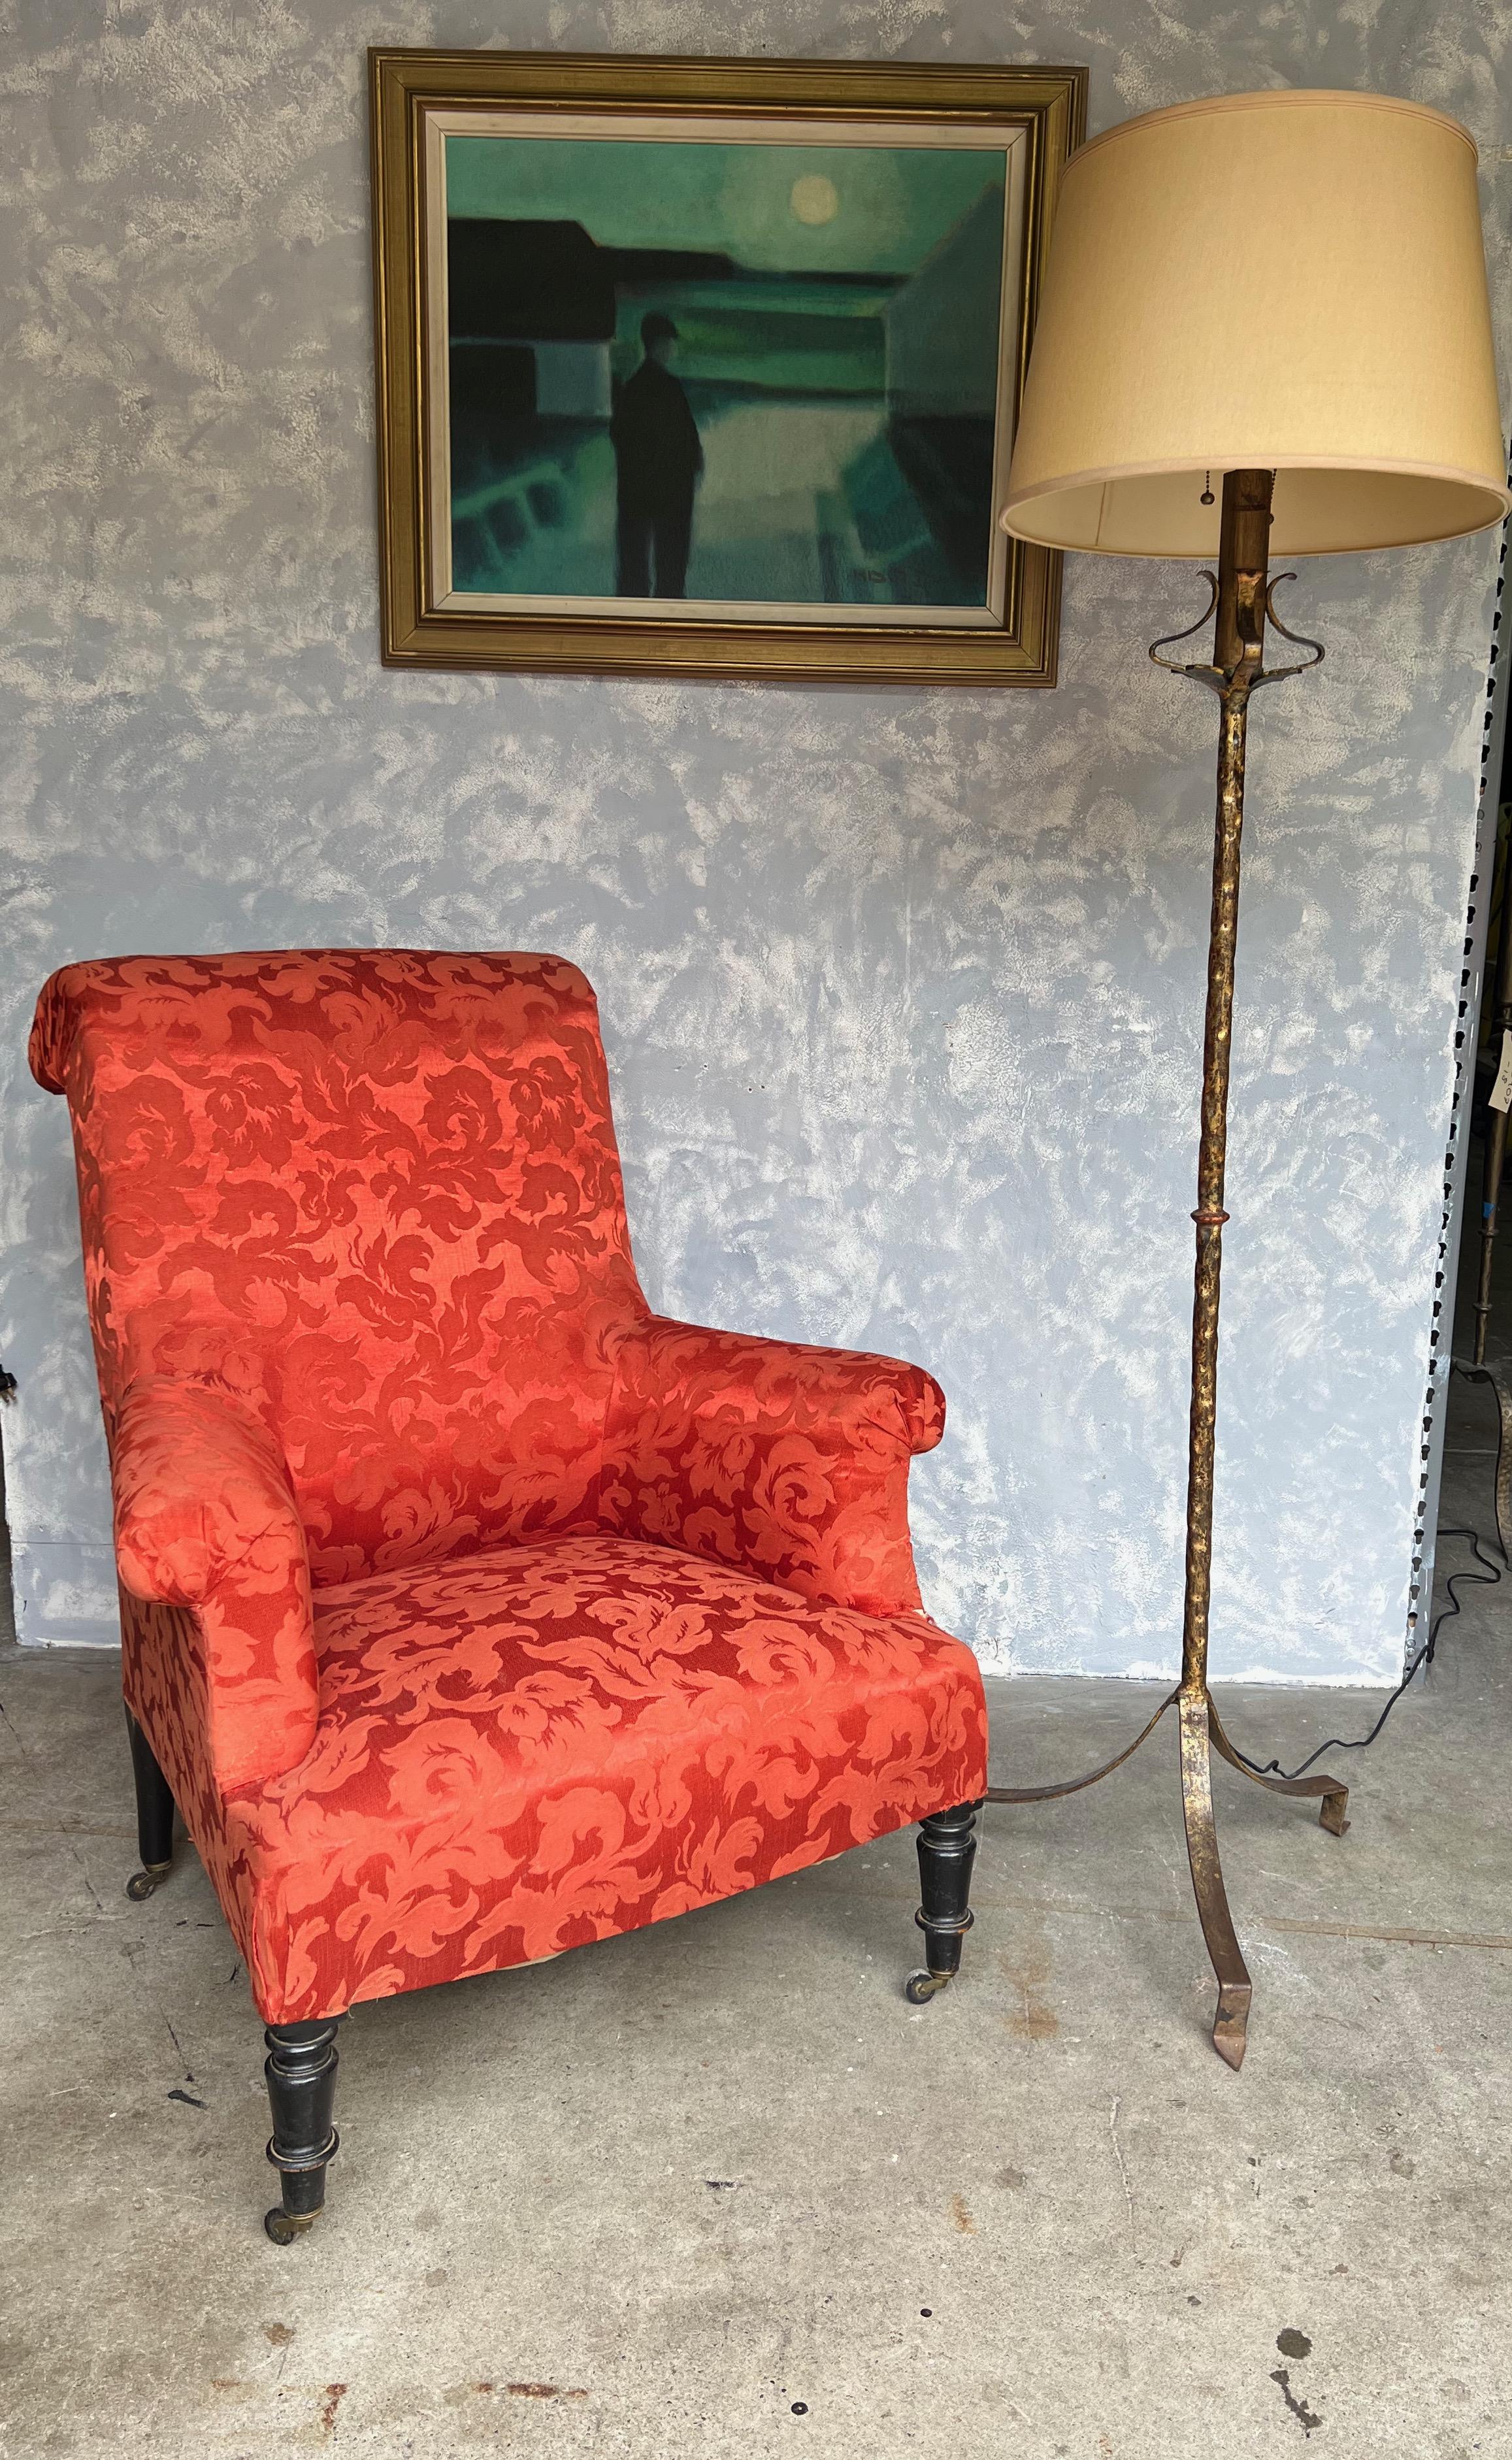 This Spanish gilt iron floor lamp, dating back to the 1950s, is a distinctive piece with its elevated tripod base. The lamp possesses an aged darkened gold patina that adds character and an air of antiquity. The stem's upper part features a hammered